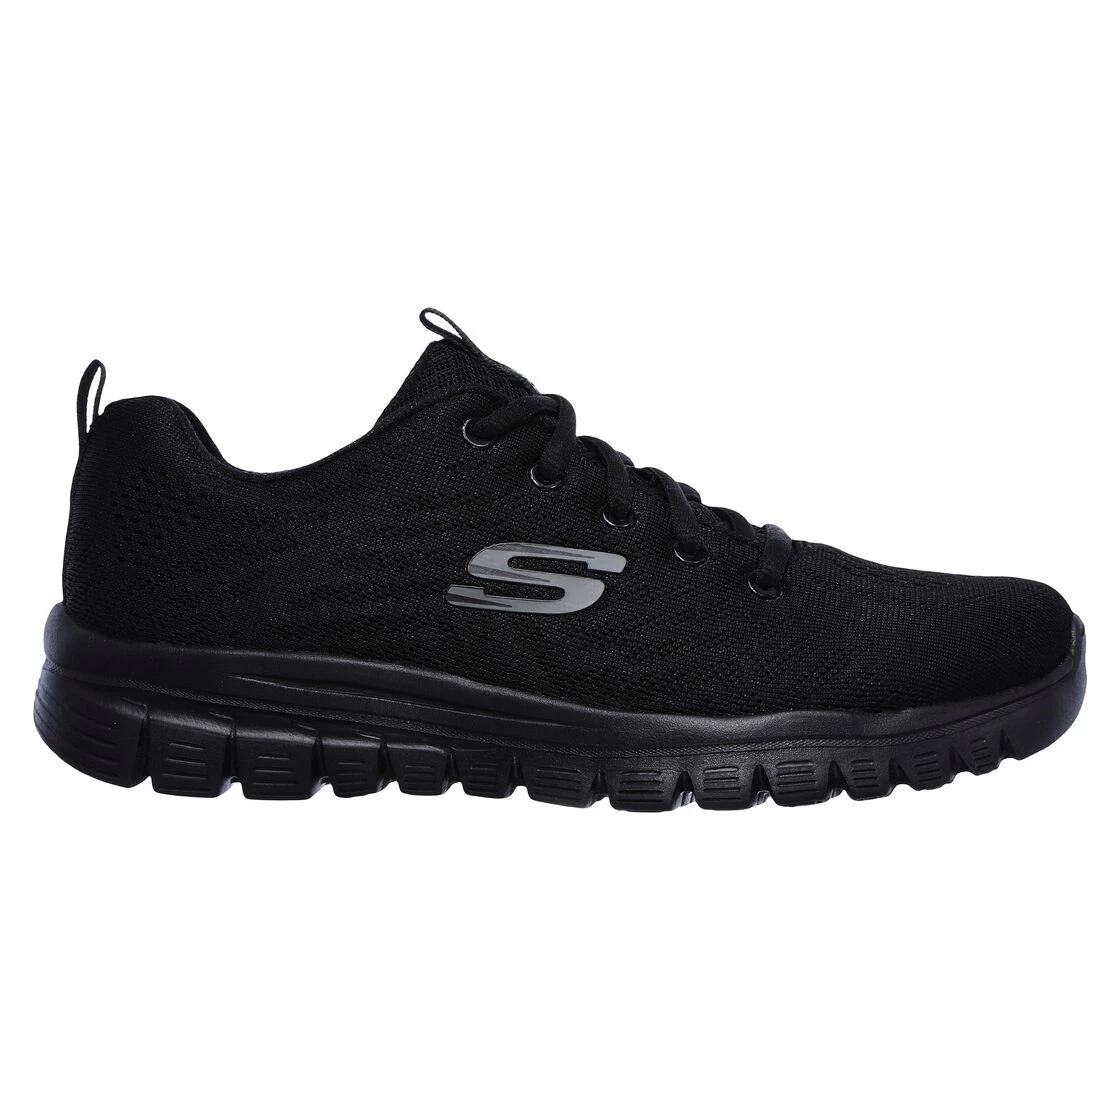 SKECHERS sports shoes, GRACEFUL GET CONNECTED, 12615 BBK, women, RUNNING,  FITNESS, training, lace up closure, black COLOR, comfortable MEMORY FOAM  insole| | - AliExpress